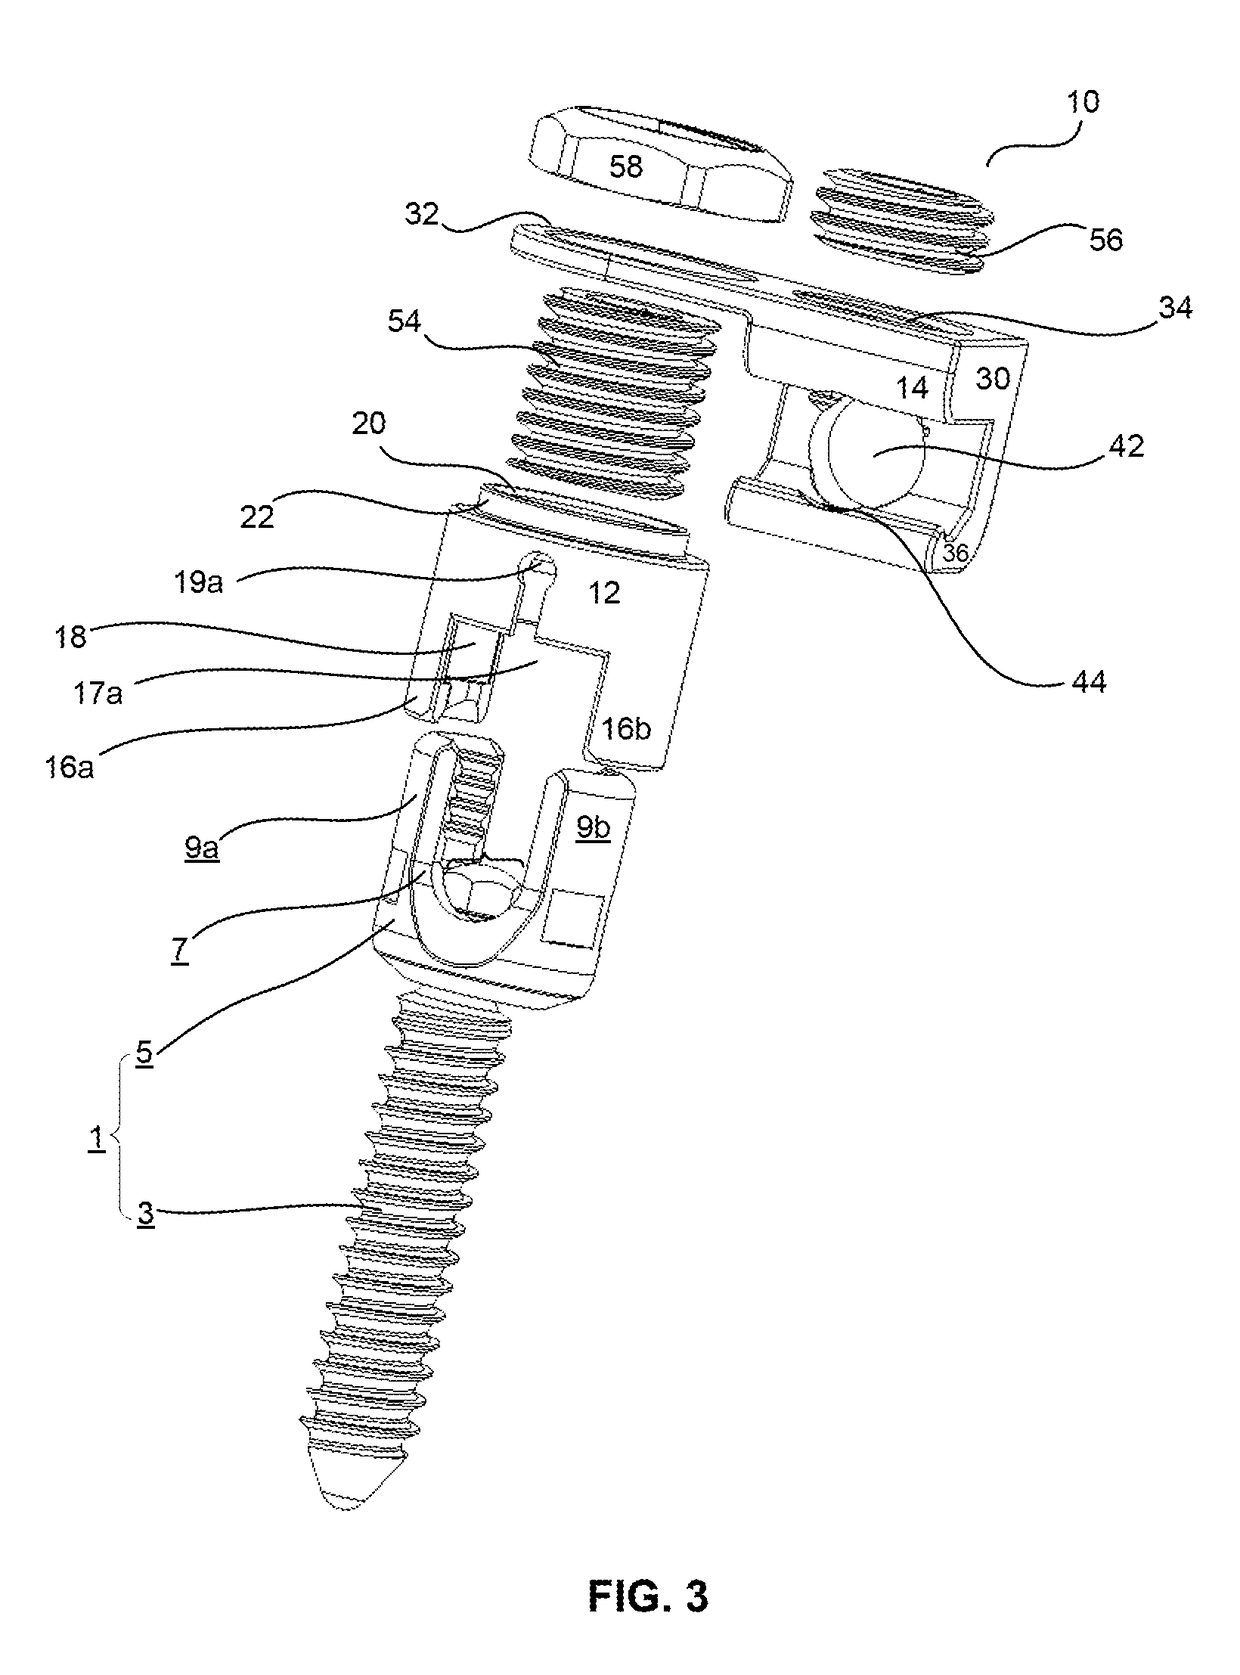 Paraxial revision rod-to-rod connector